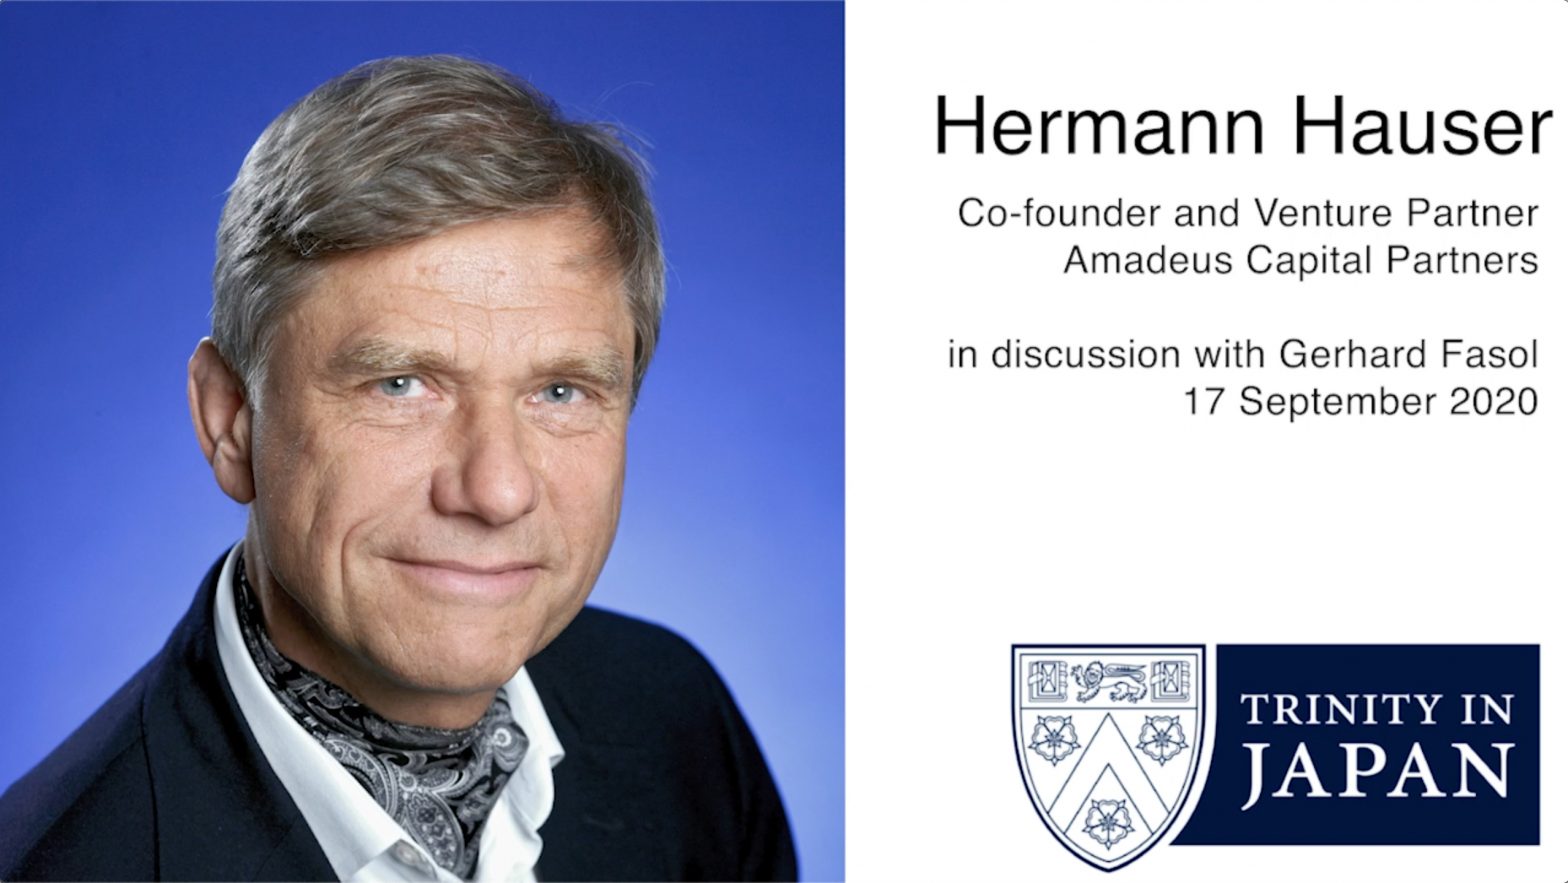 Struggling for Europe’s technology sovereignty – a comment on Hermann Hauser’s proposal for a €100 billion Technology Sovereignty Fund